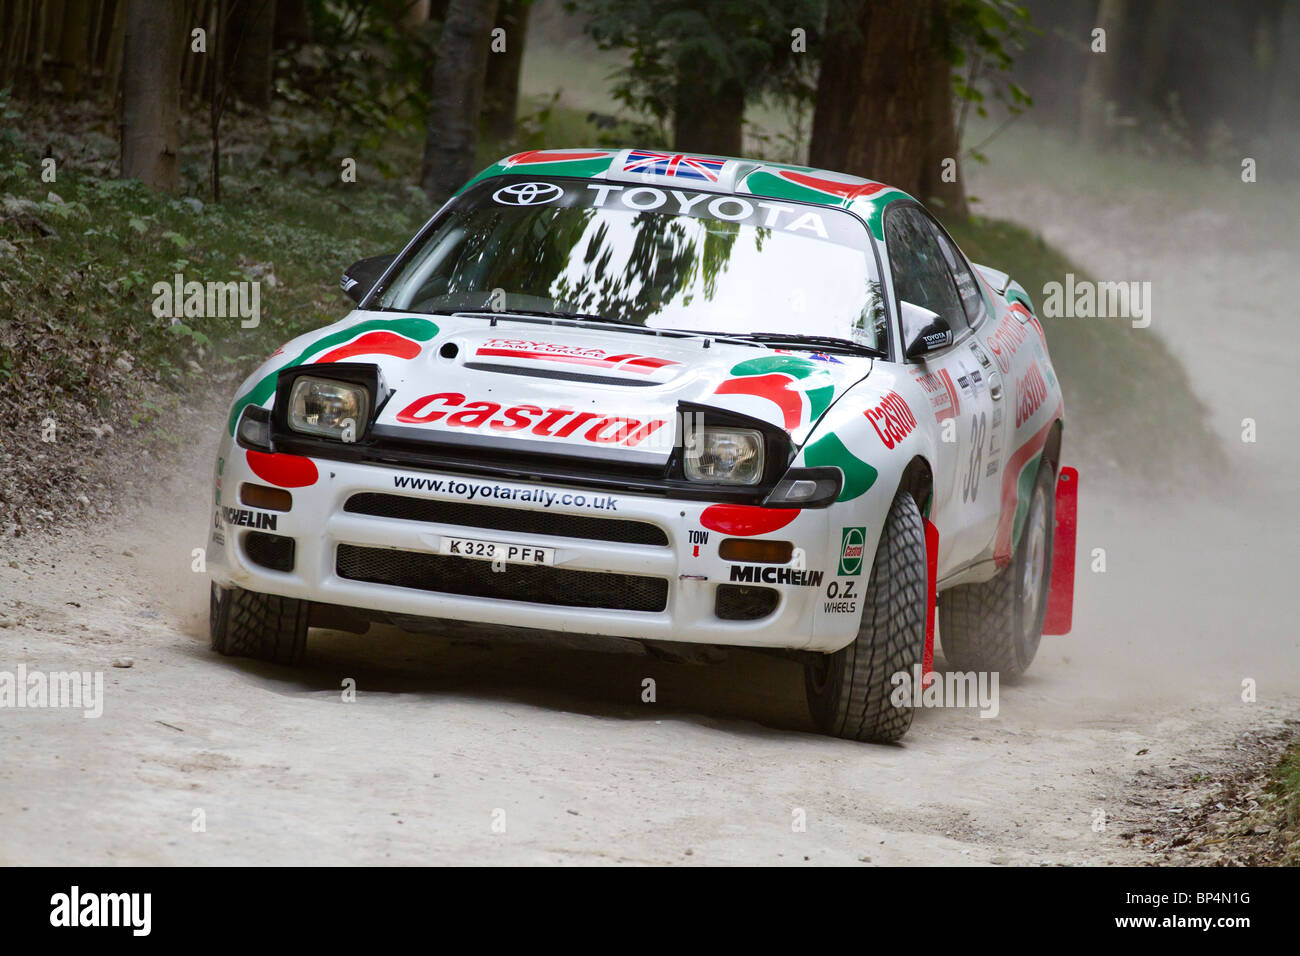 1996 Toyota Celica GT-Four RC/ST185 rally car with driver Gary Le Coadou at the 2010 Goodwood Festival of Speed, Sussex, UK. Stock Photo